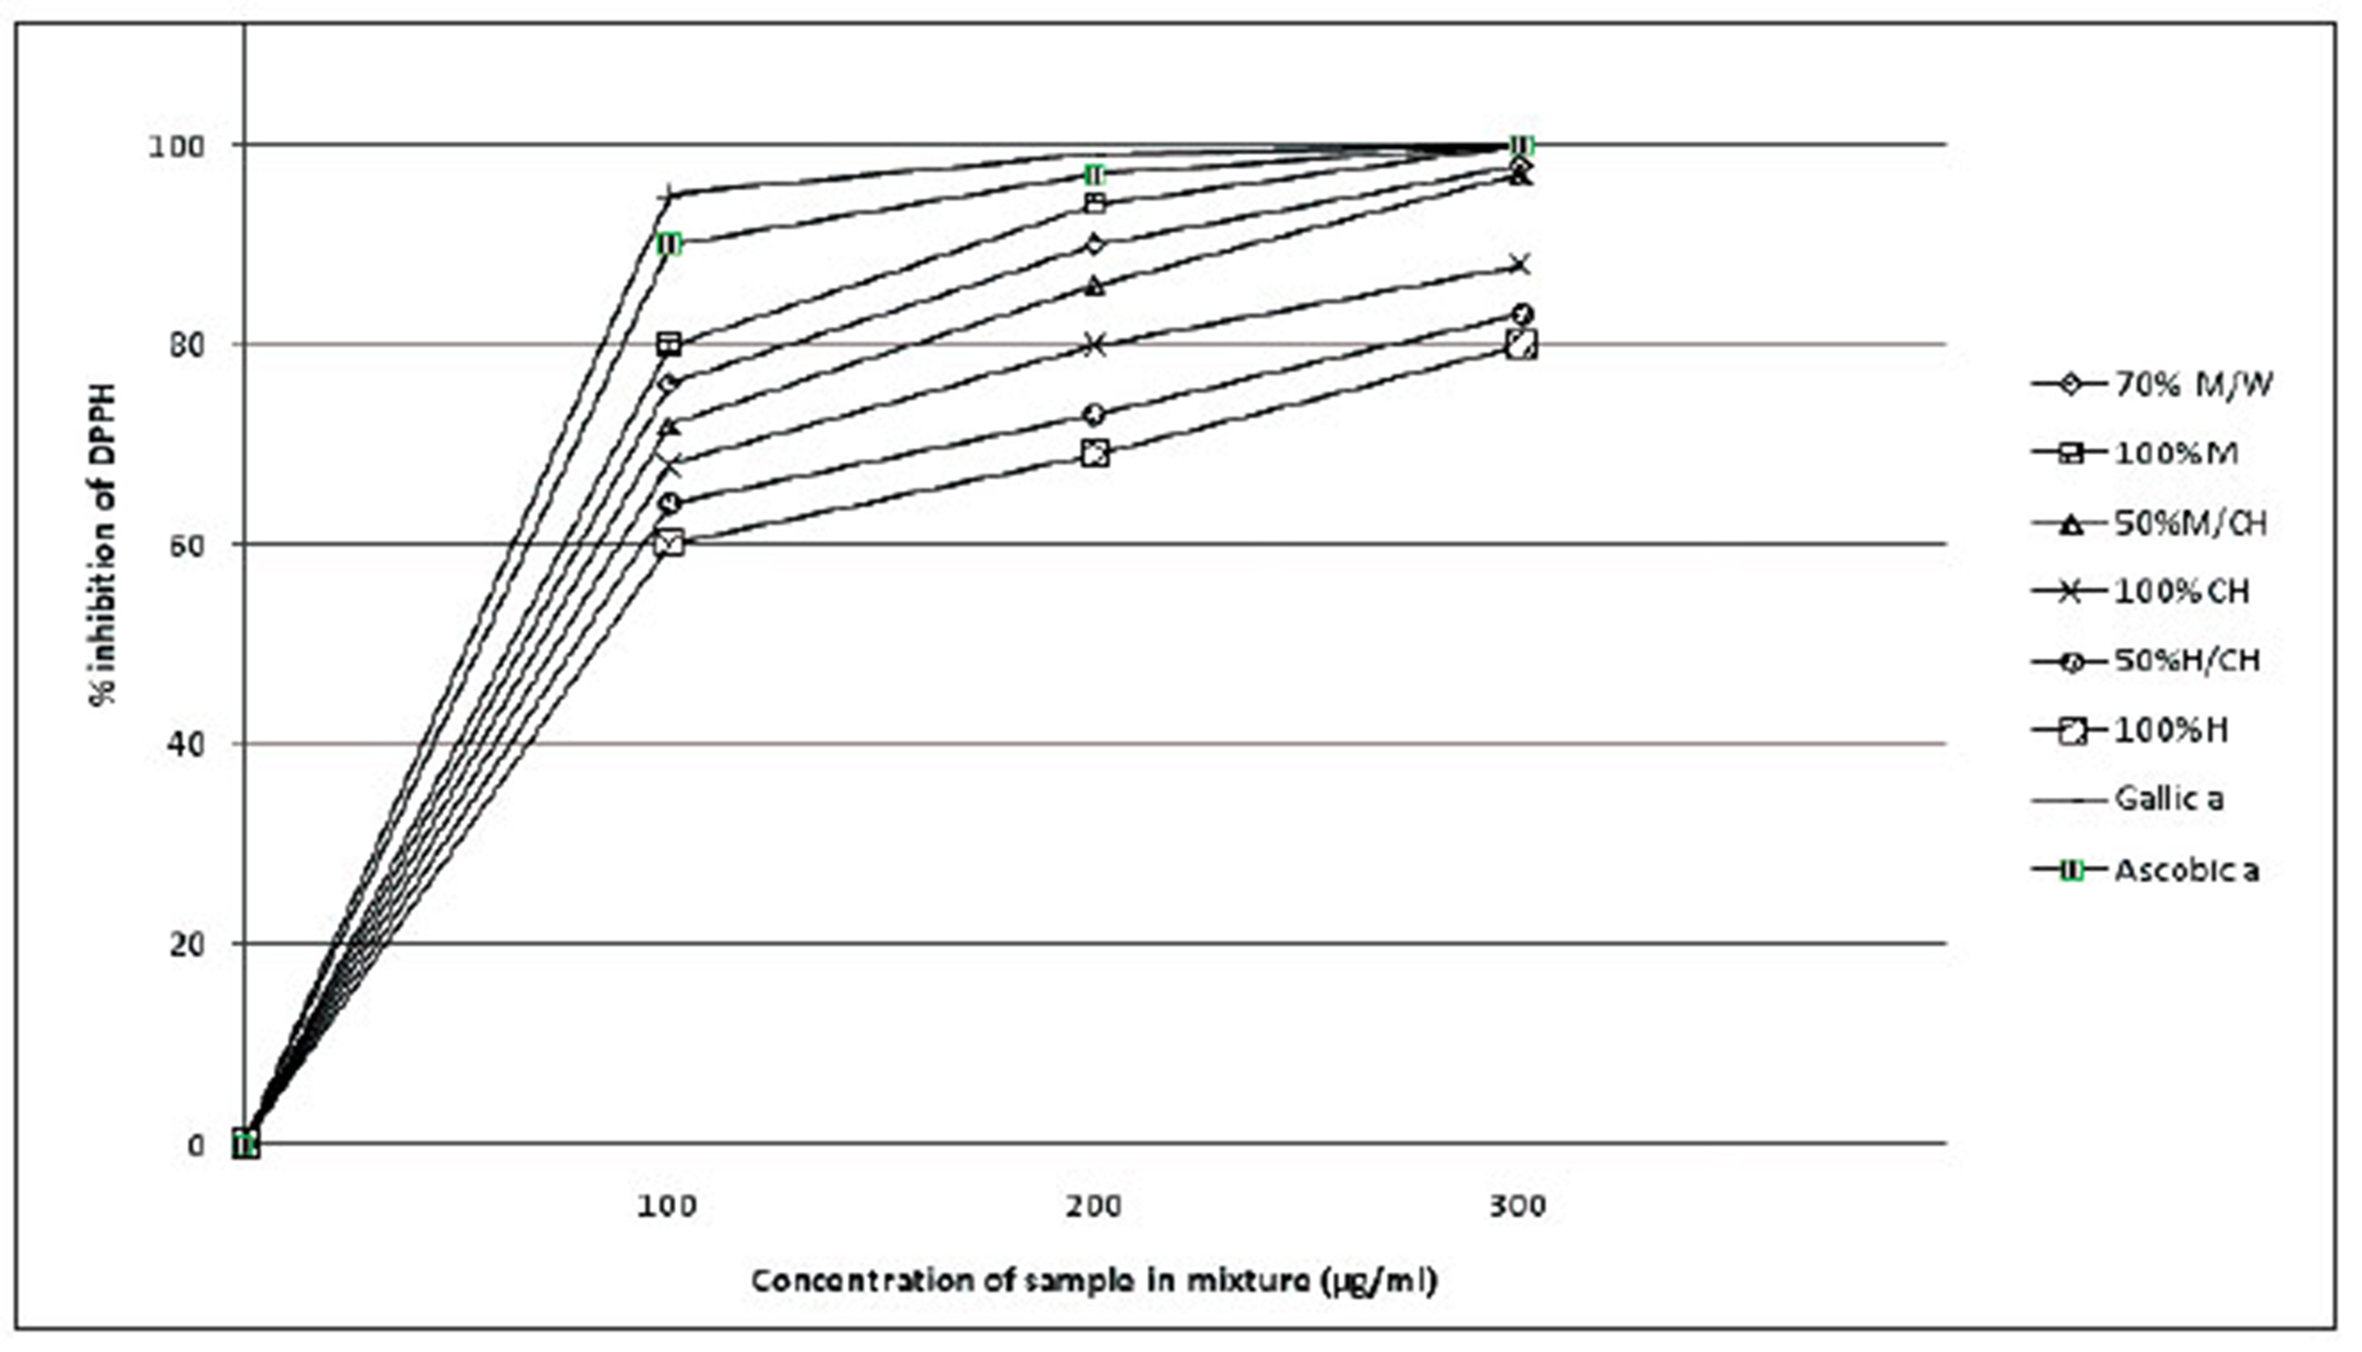 Percent inhibition of DPPH by different concentrations of Z. mucronata fruit extracts after 30 min.